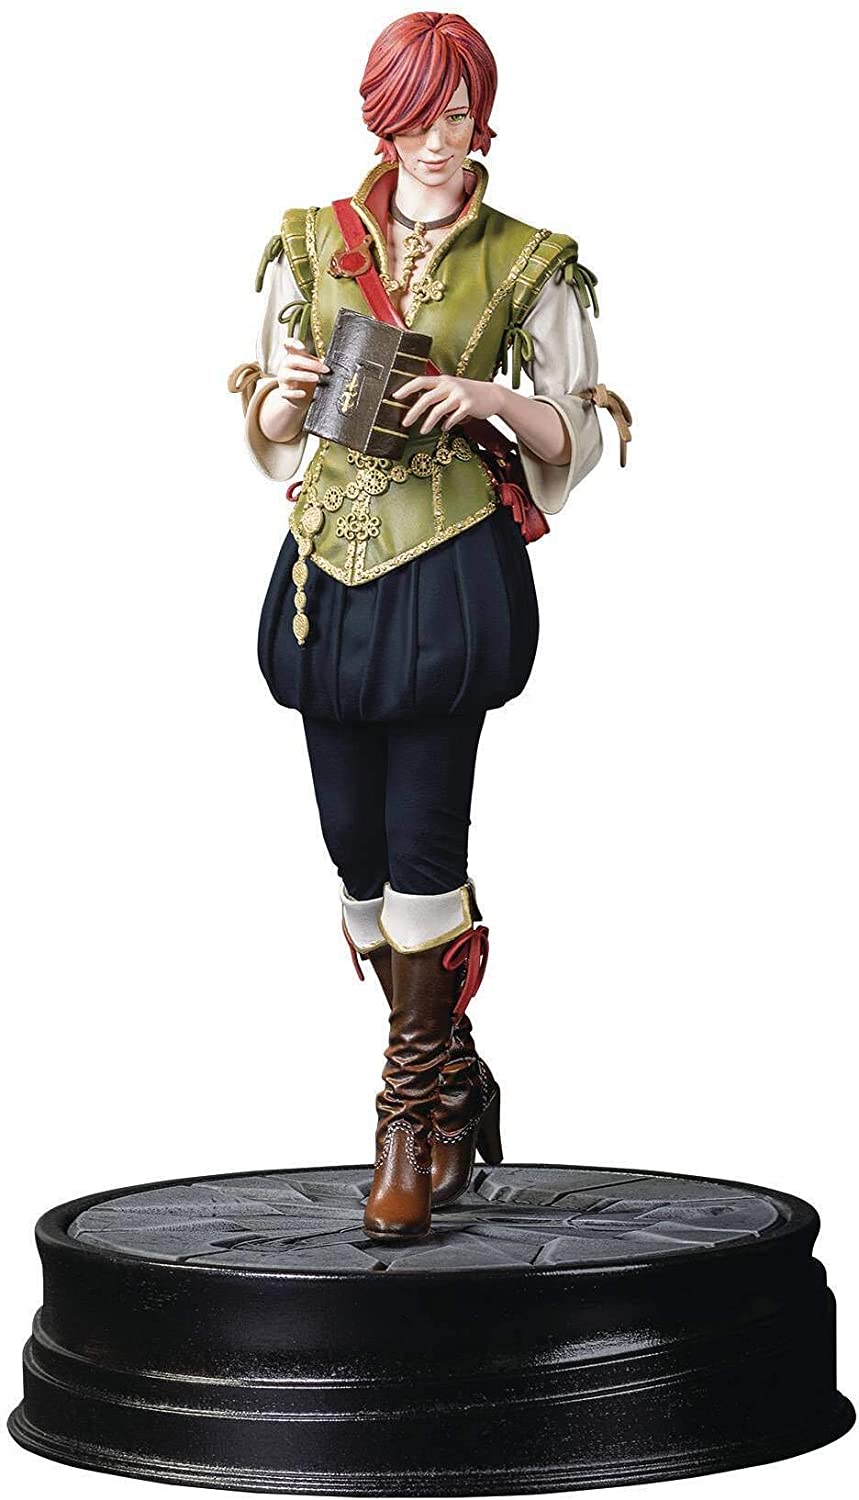 The Witcher 3000-889 3 Shani Action Figure, Multi-Colour